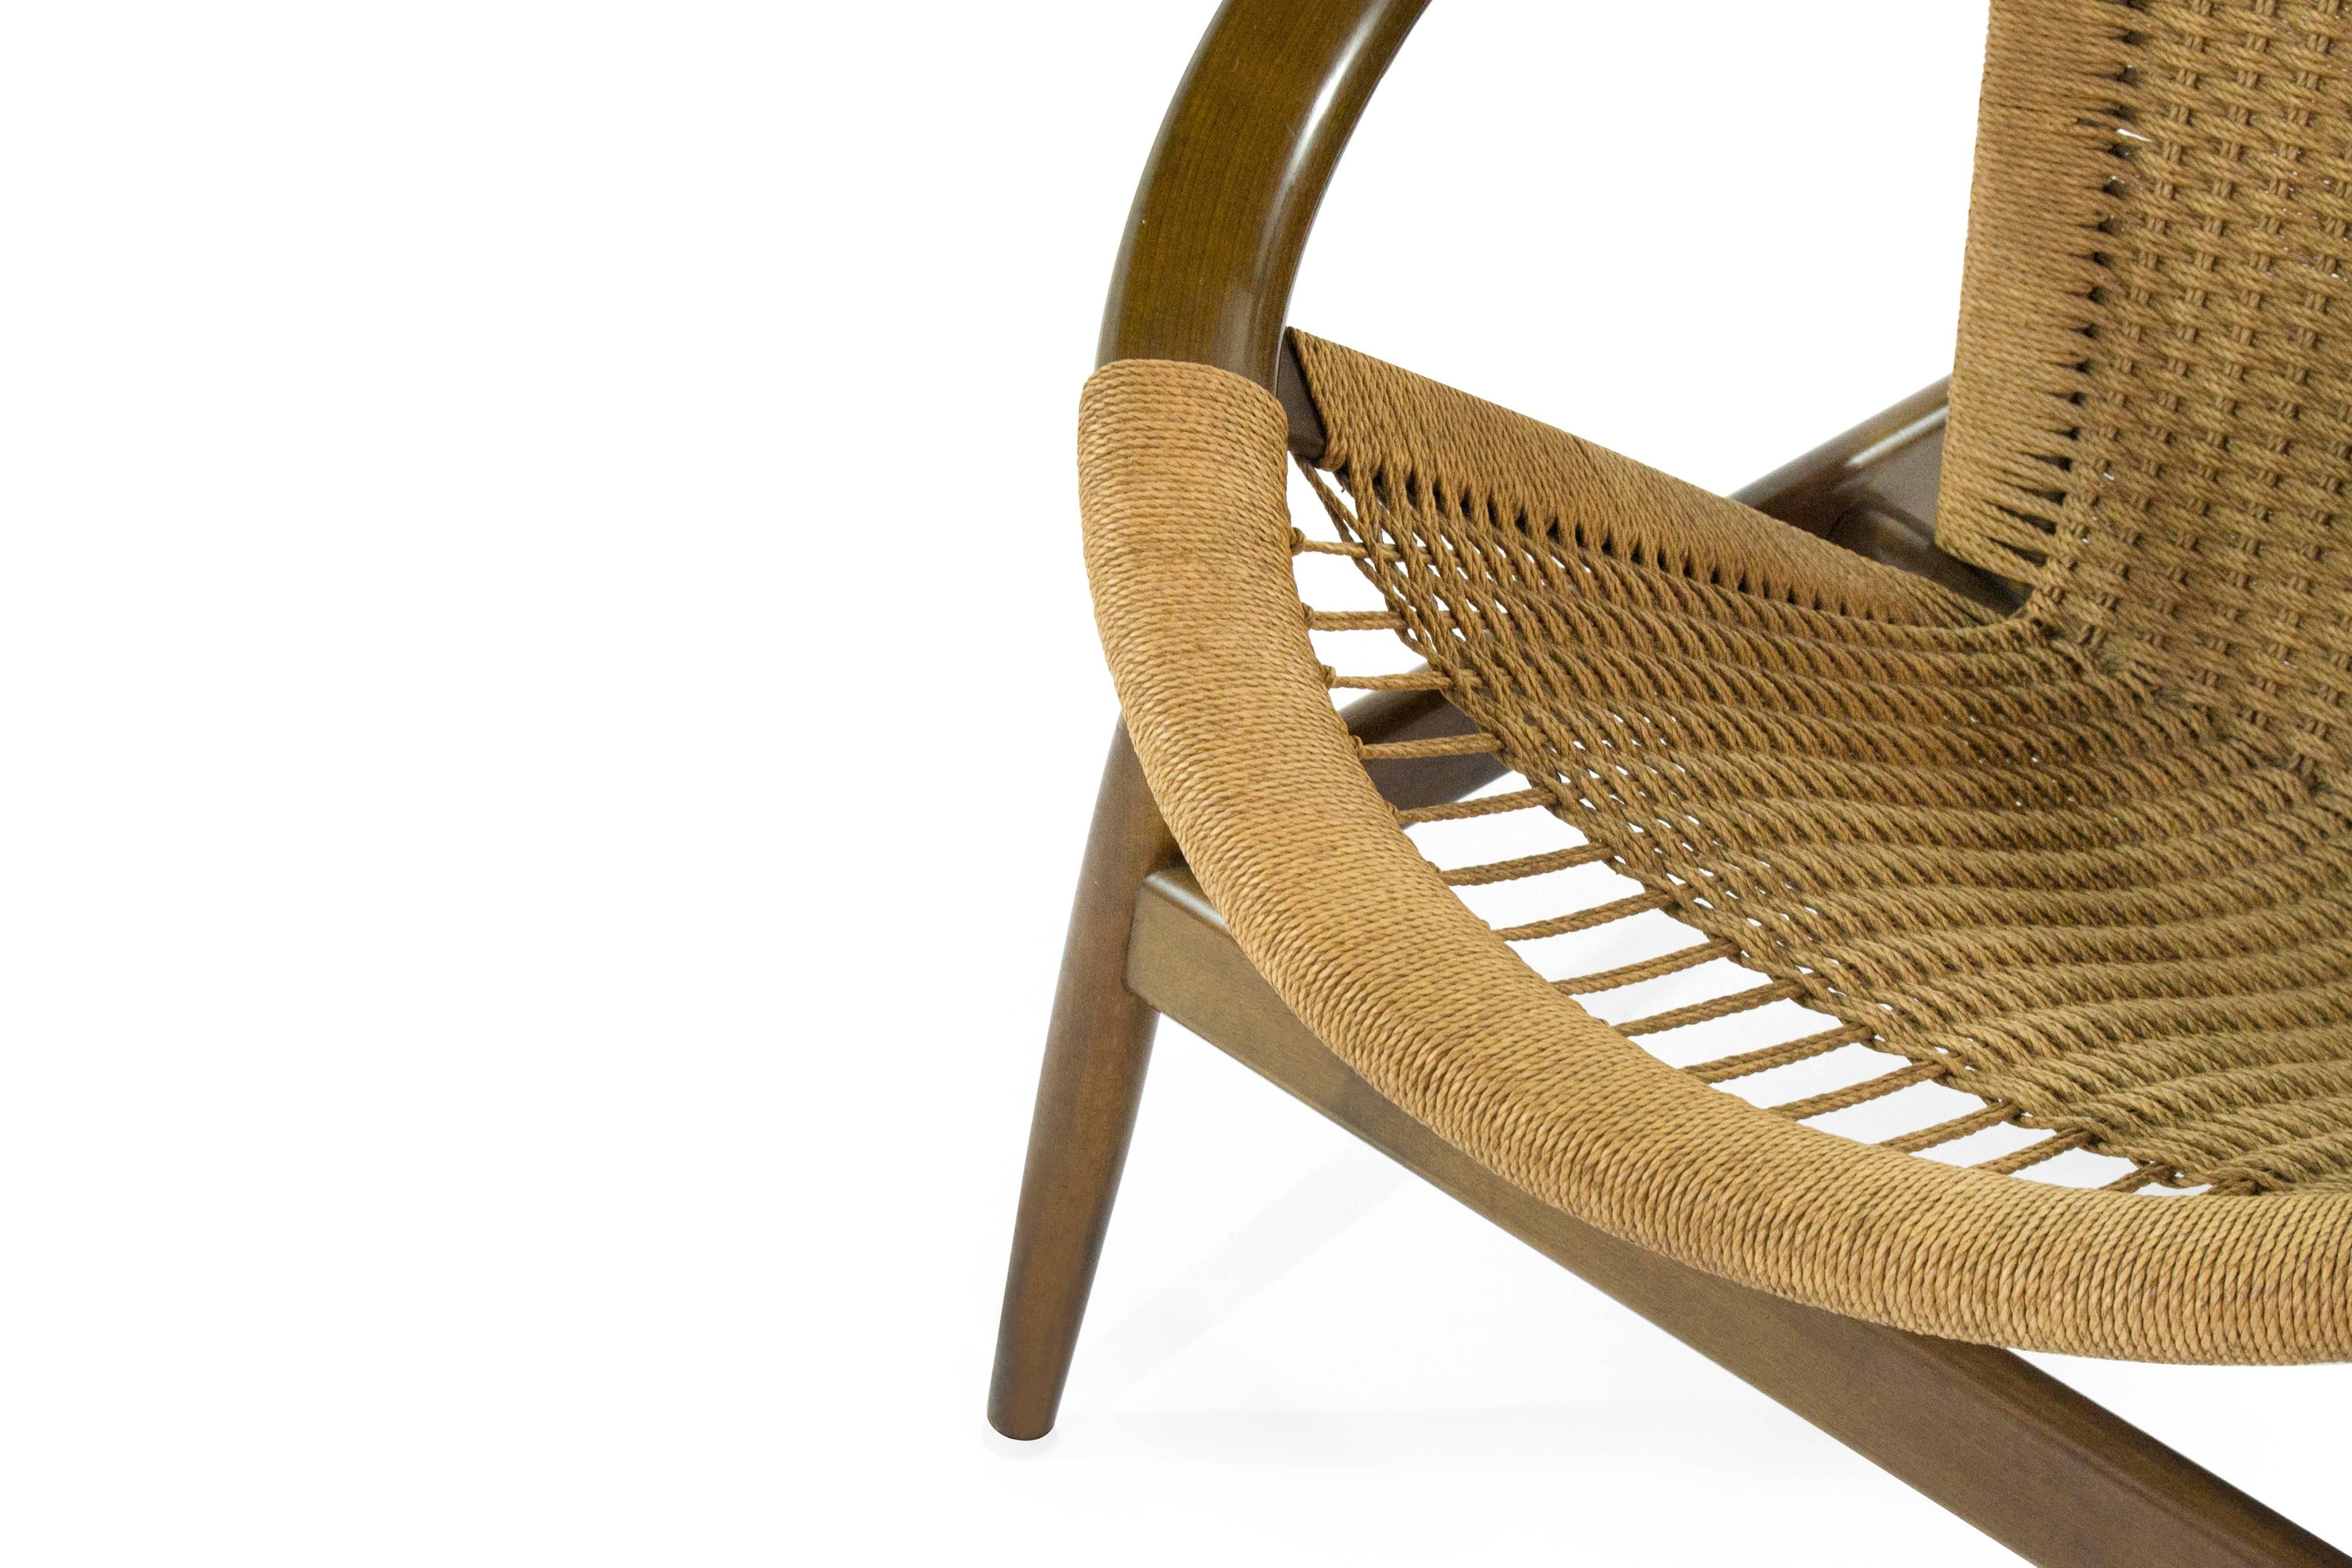 Illum Wikkelso Ringstol Number 23 Teak and Woven Cord Ring Chair 2